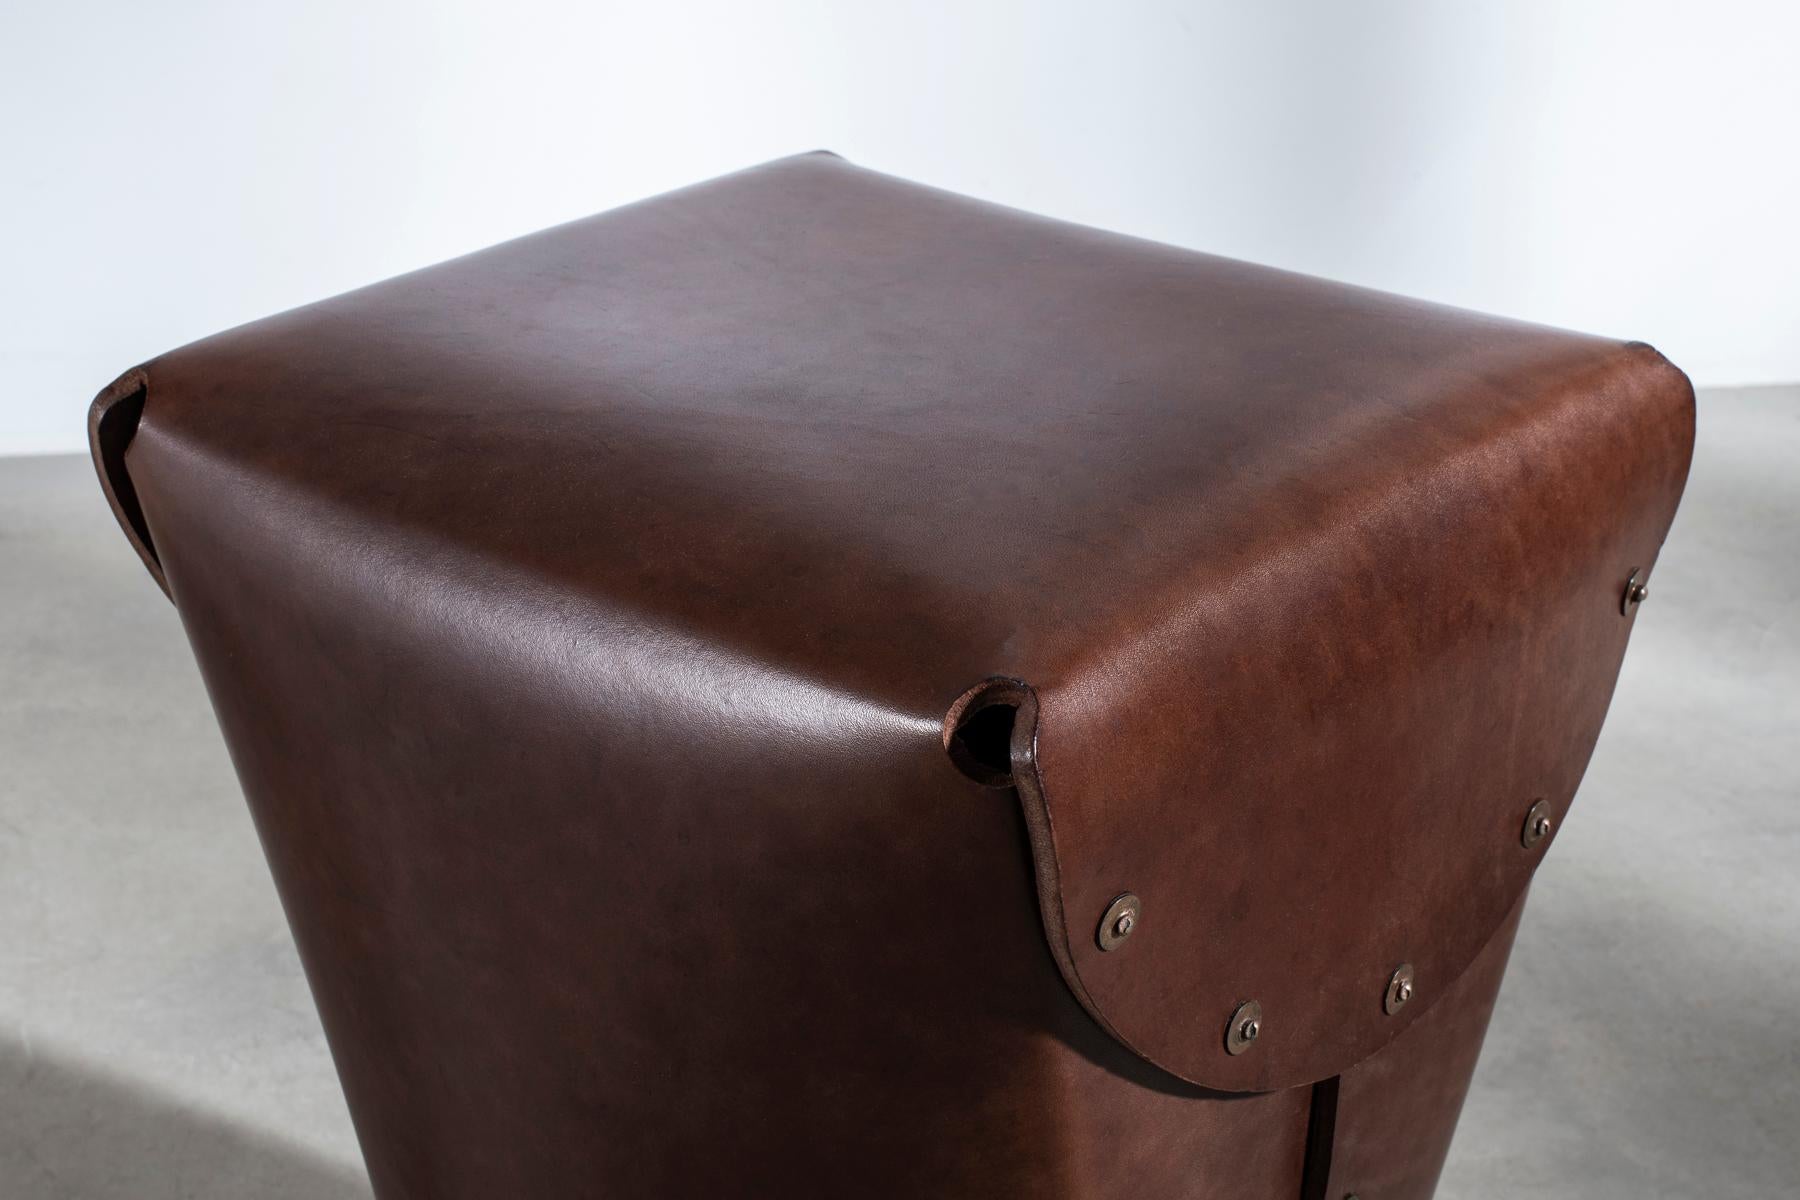 Rivet Stool II by Bill Amberg, bridle leather stool with hand-set copper rivets For Sale 2